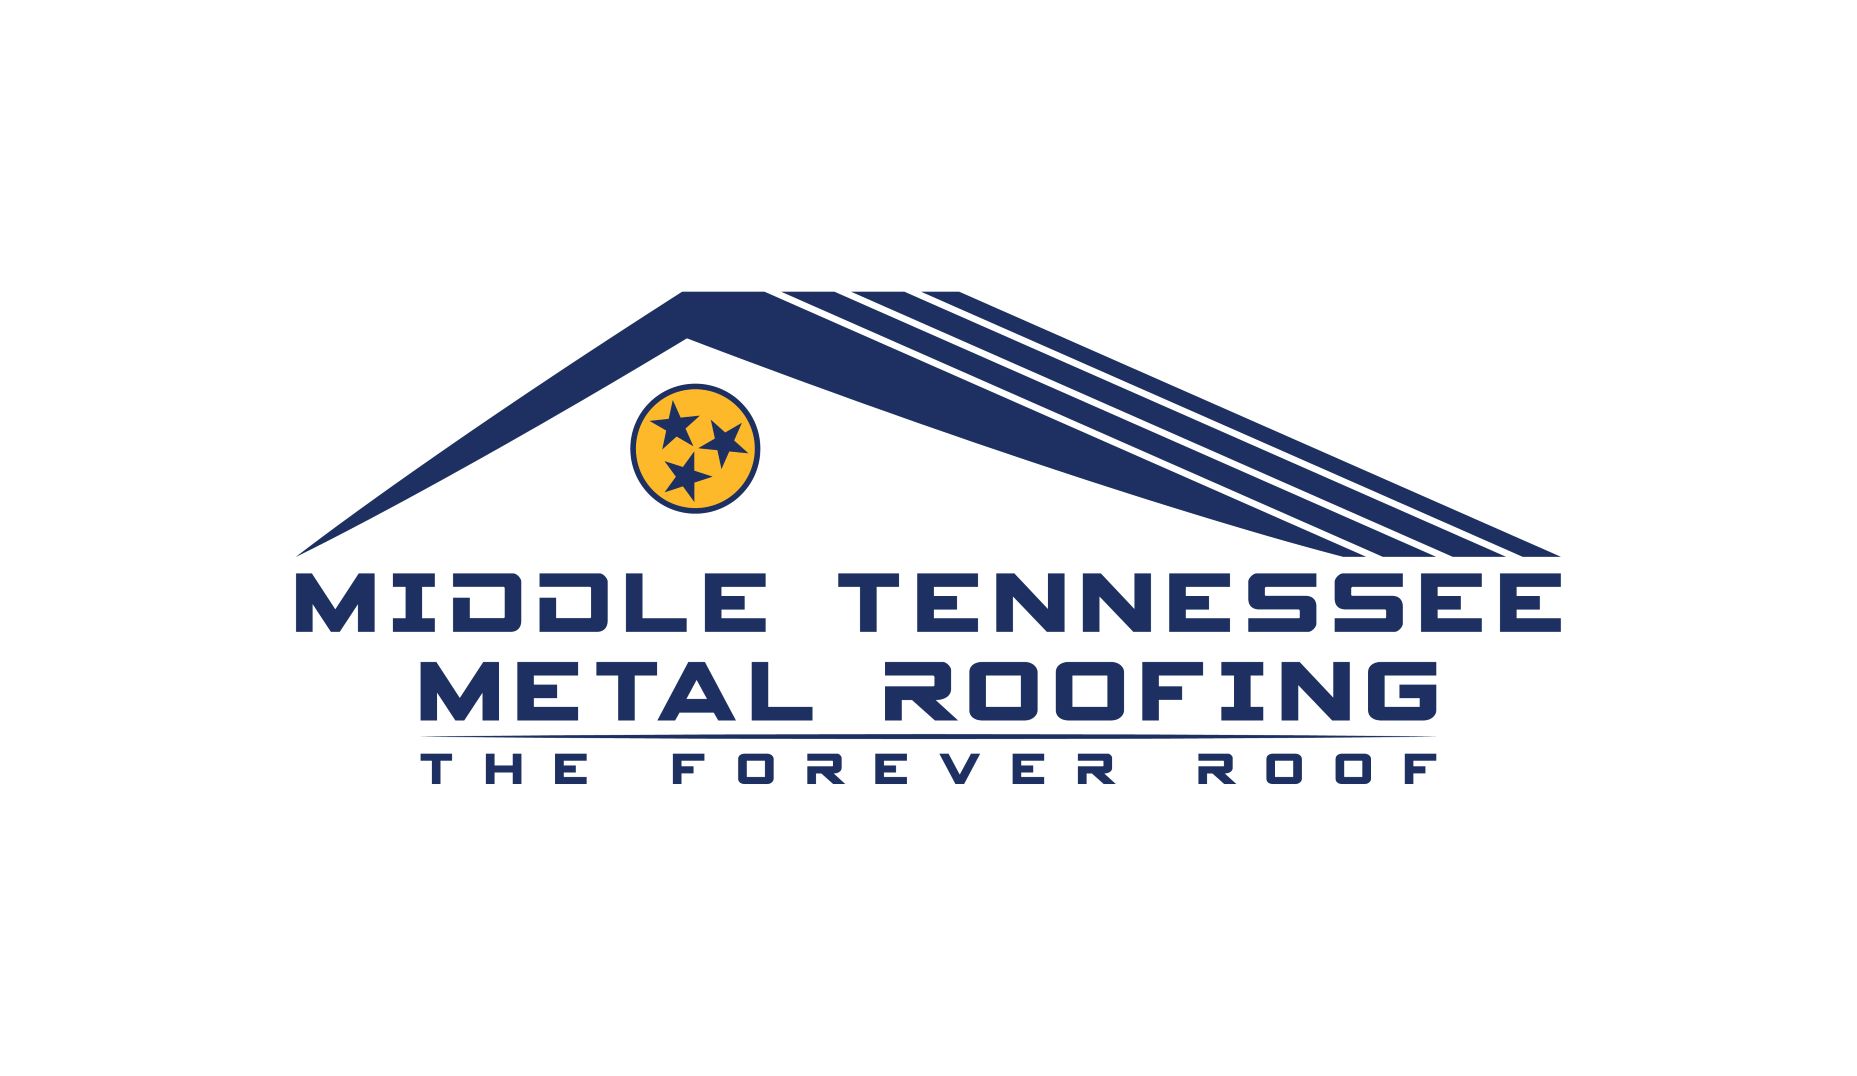 Middle Tennessee Metal Roofing Logo